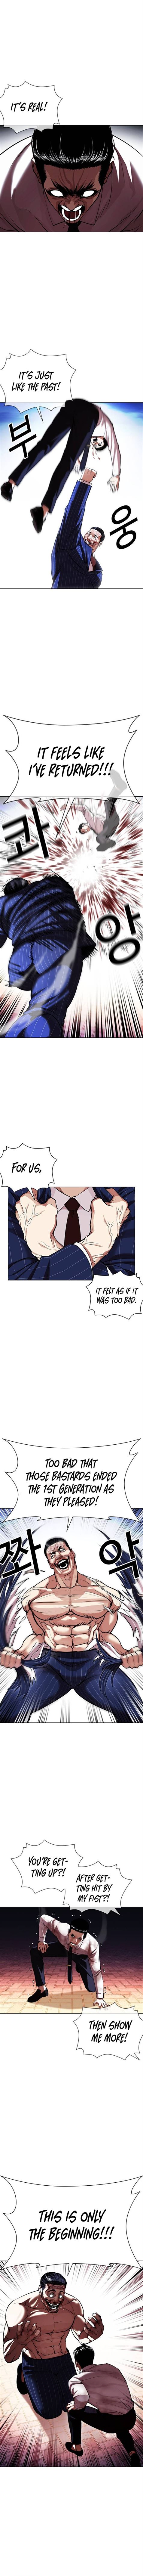 Lookism Chapter 408 image 8